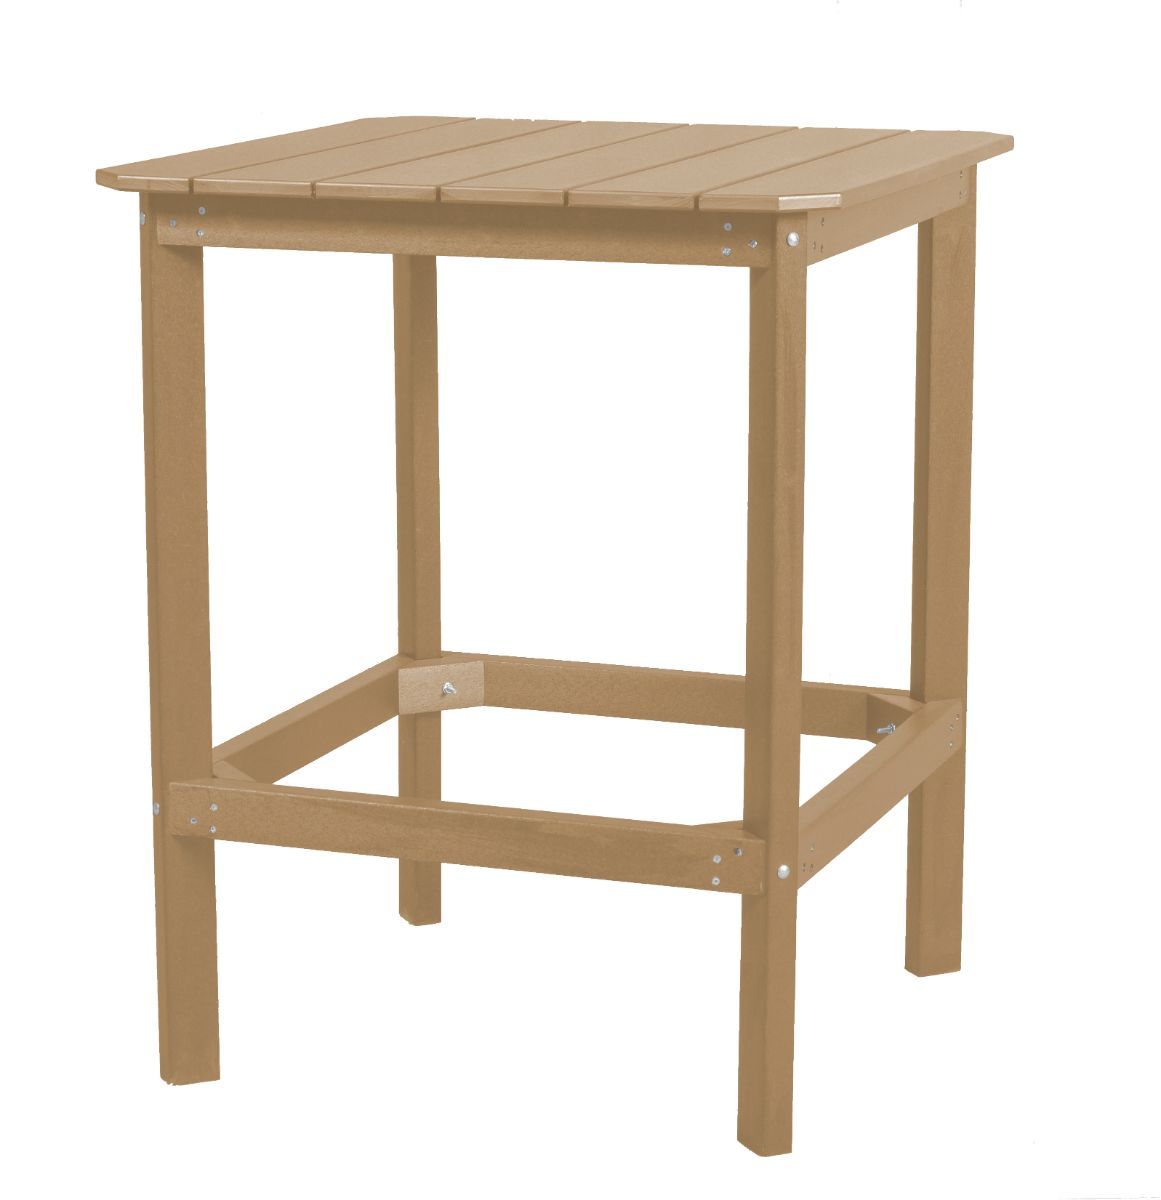 Weathered Wood Panama High Outdoor Dining Table